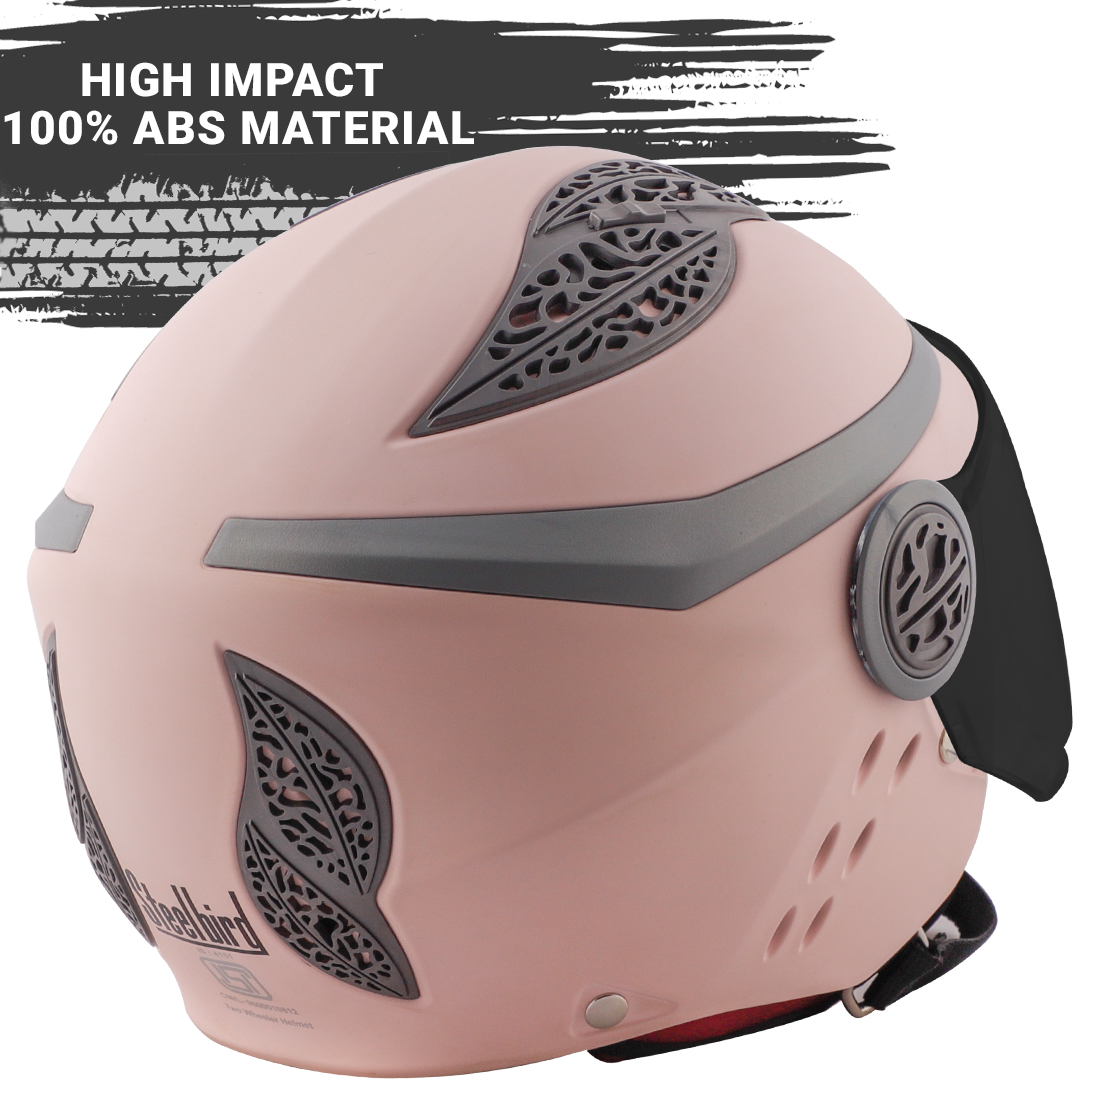 Steelbird Fairy Specially Designed ISI Certified Helmet For Girls || Womens  (Glossy Light Pink With Smoke Visor)